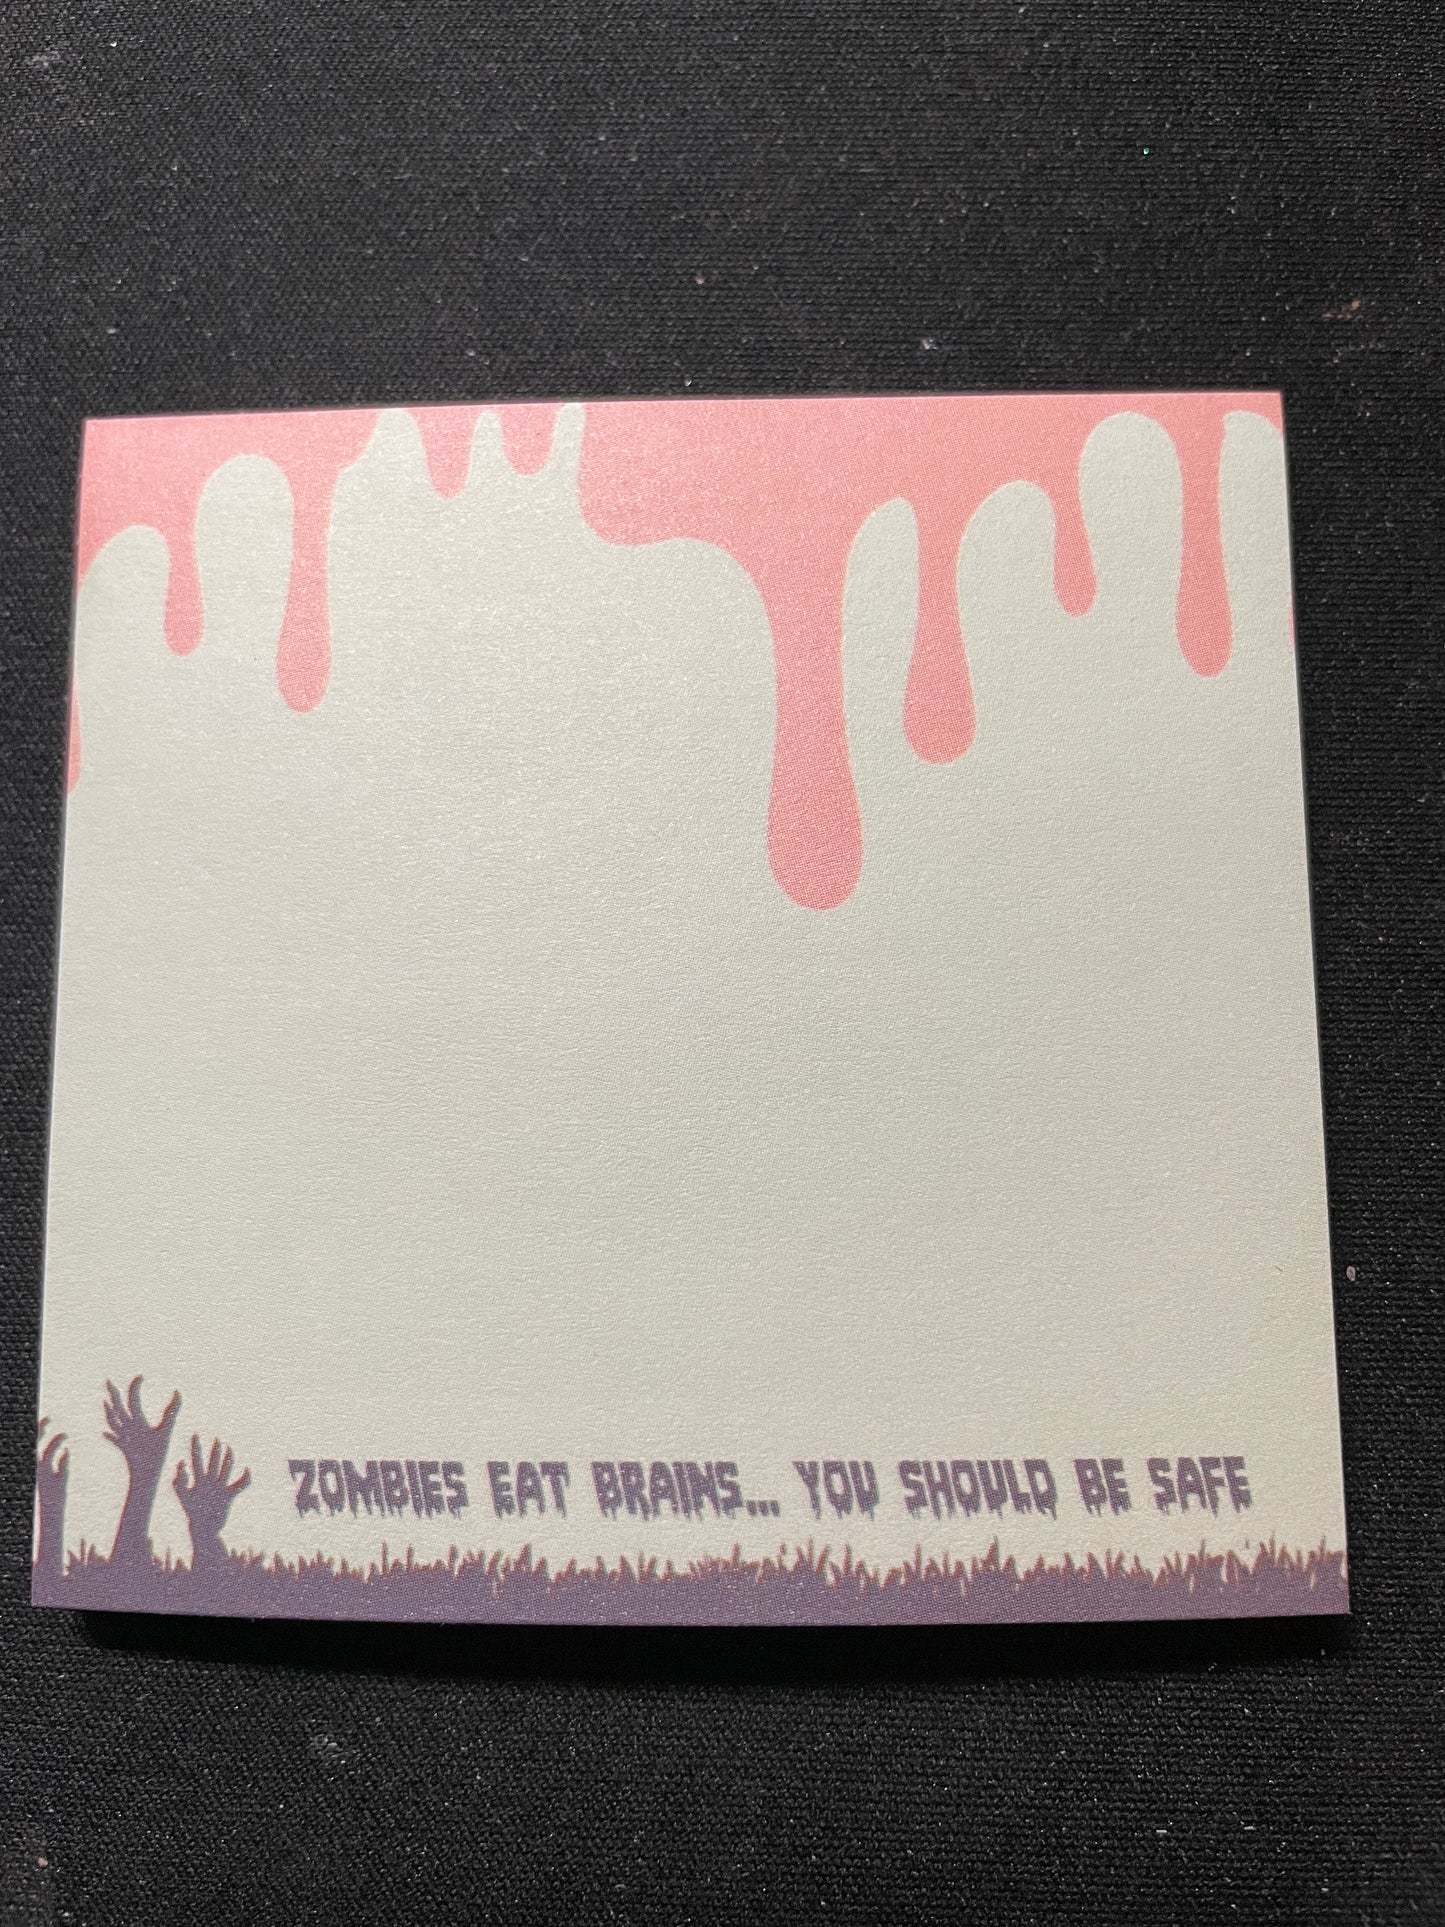 post it note - Zombies eat brains... you should be safe, zombie, zombies, sticky note, stickynote, postit note, funny, sarcastic, snarky, custom post it notes, post it brand, designed by me